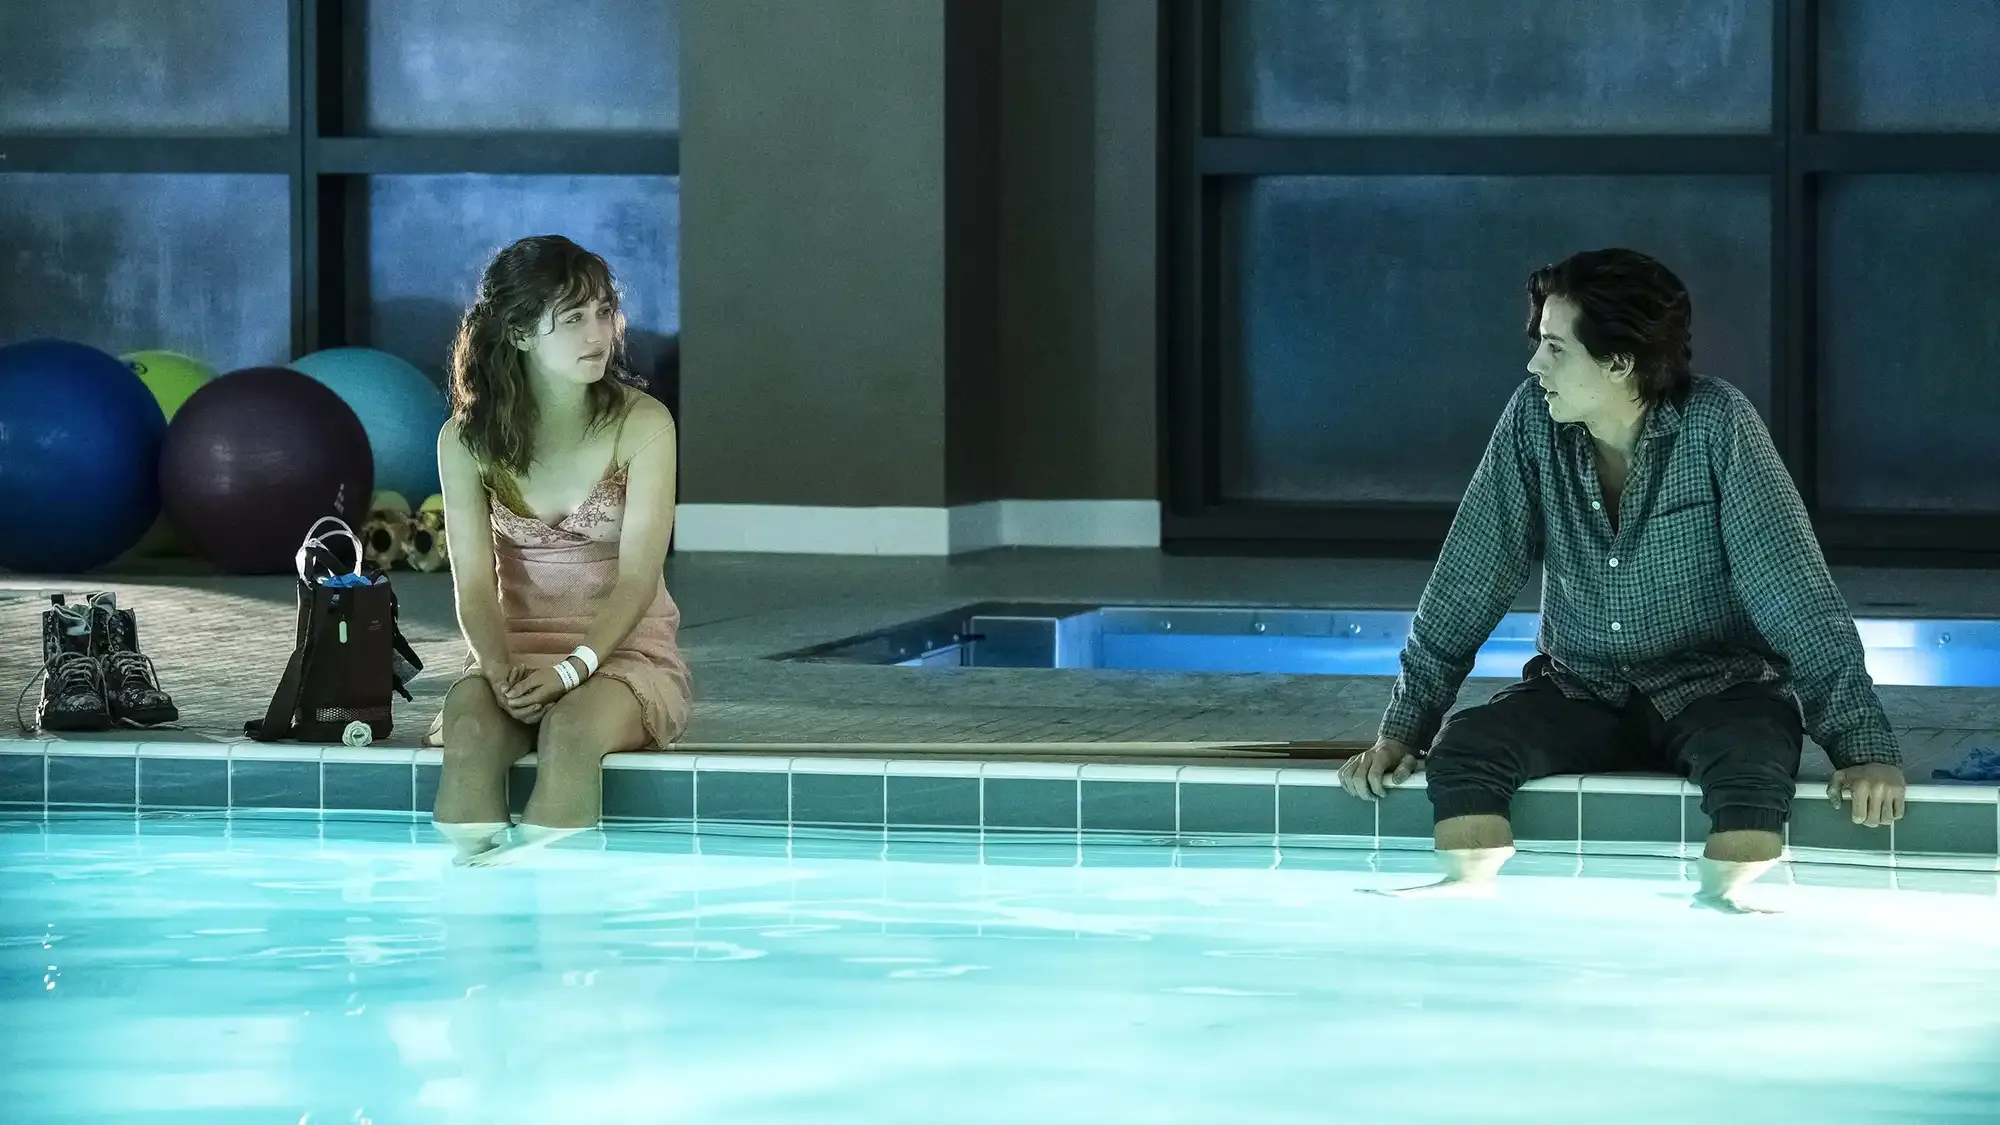 Five Feet Apart movie review